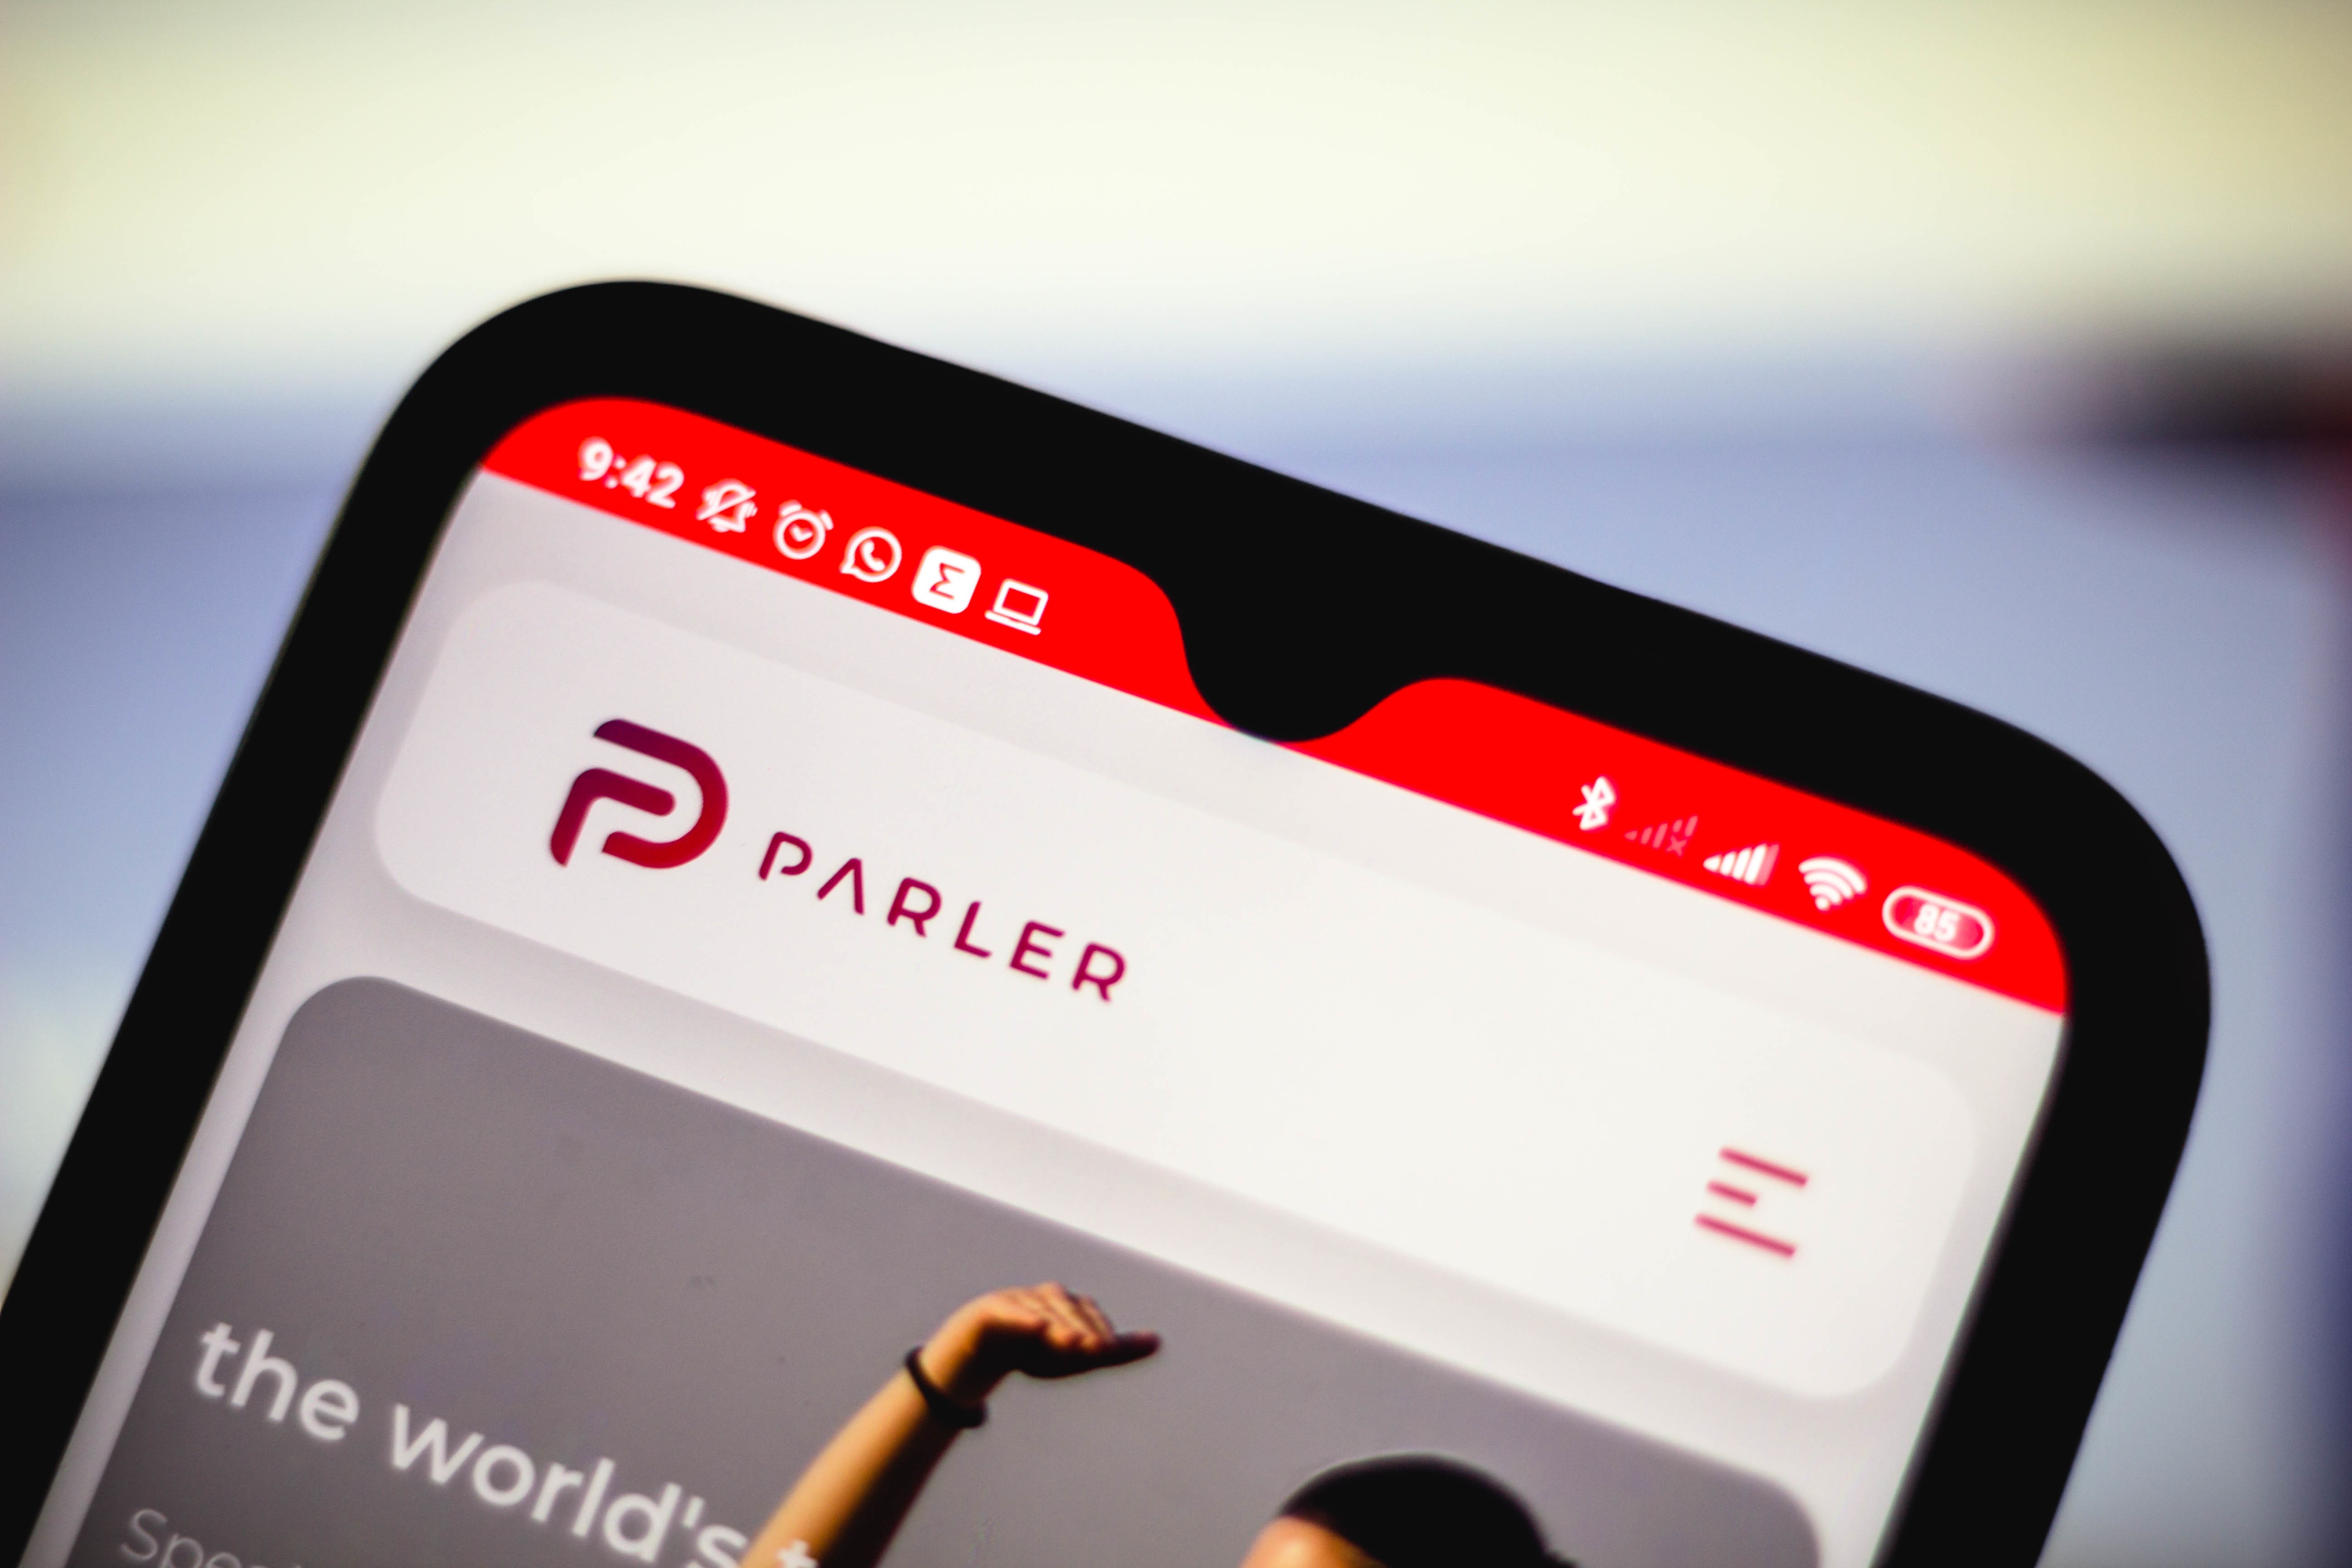 The Parler logo is seen displayed on a smartphone.